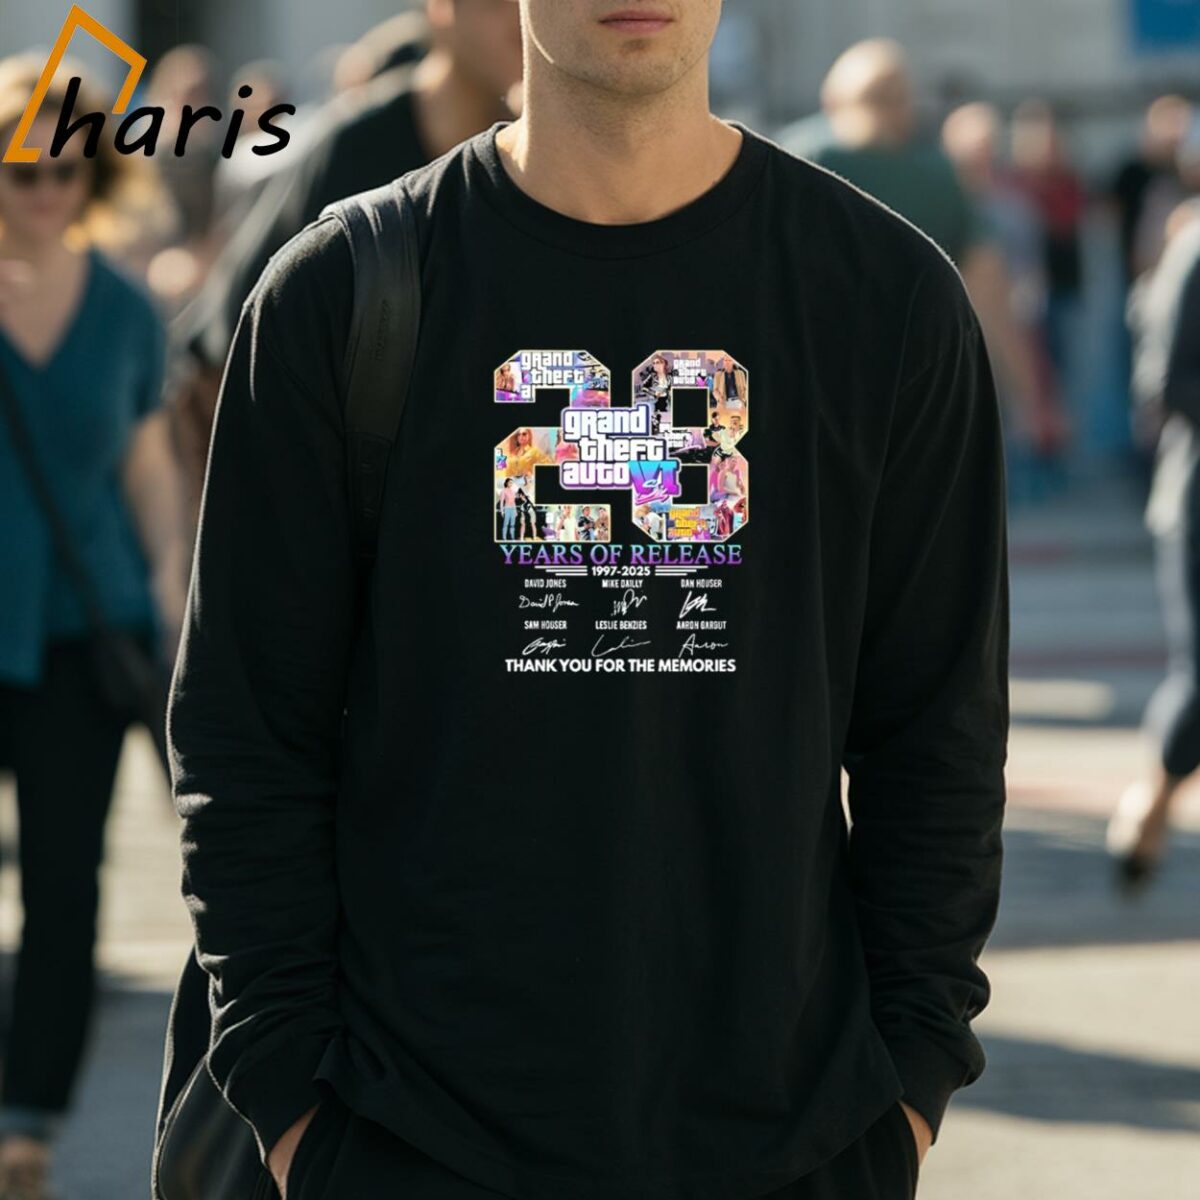 Grand Theft Auto VI Years Of Release 1997 2025 Thank You For The Memories T shirt 3 Long Sleeve Shirt